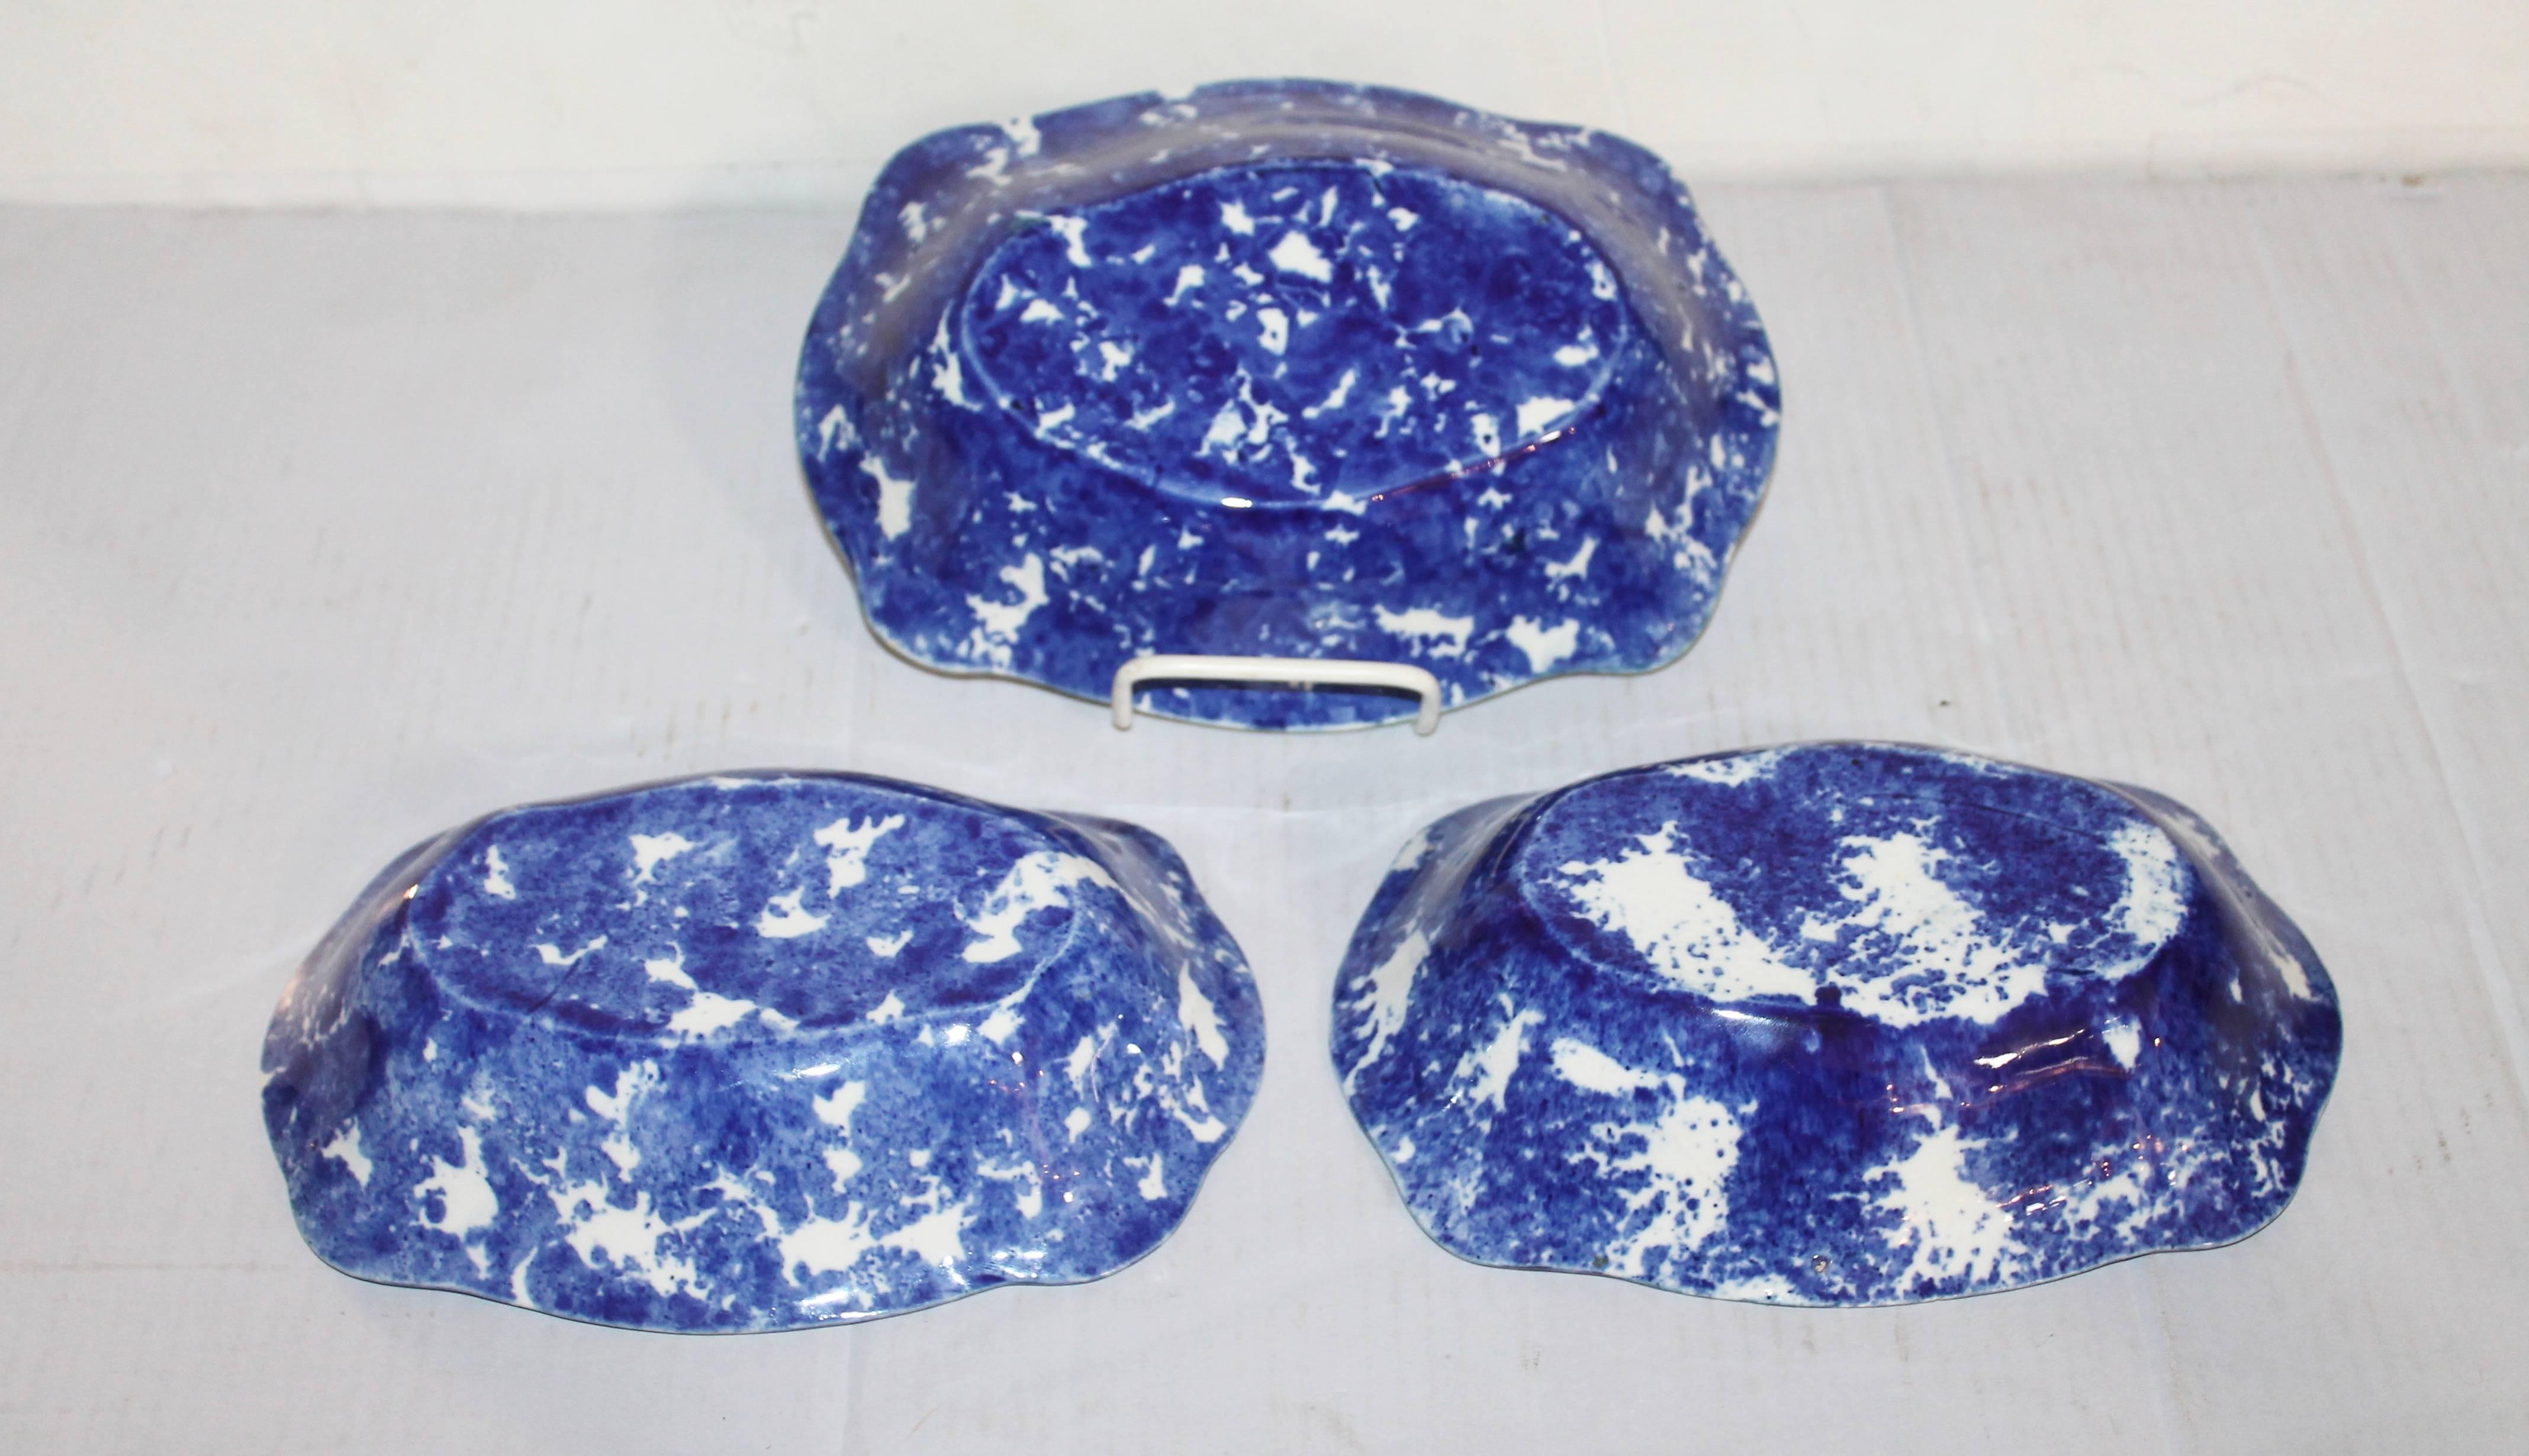 Country Collection of Three 19th Century Sponge Ware Vegetable Bowls For Sale